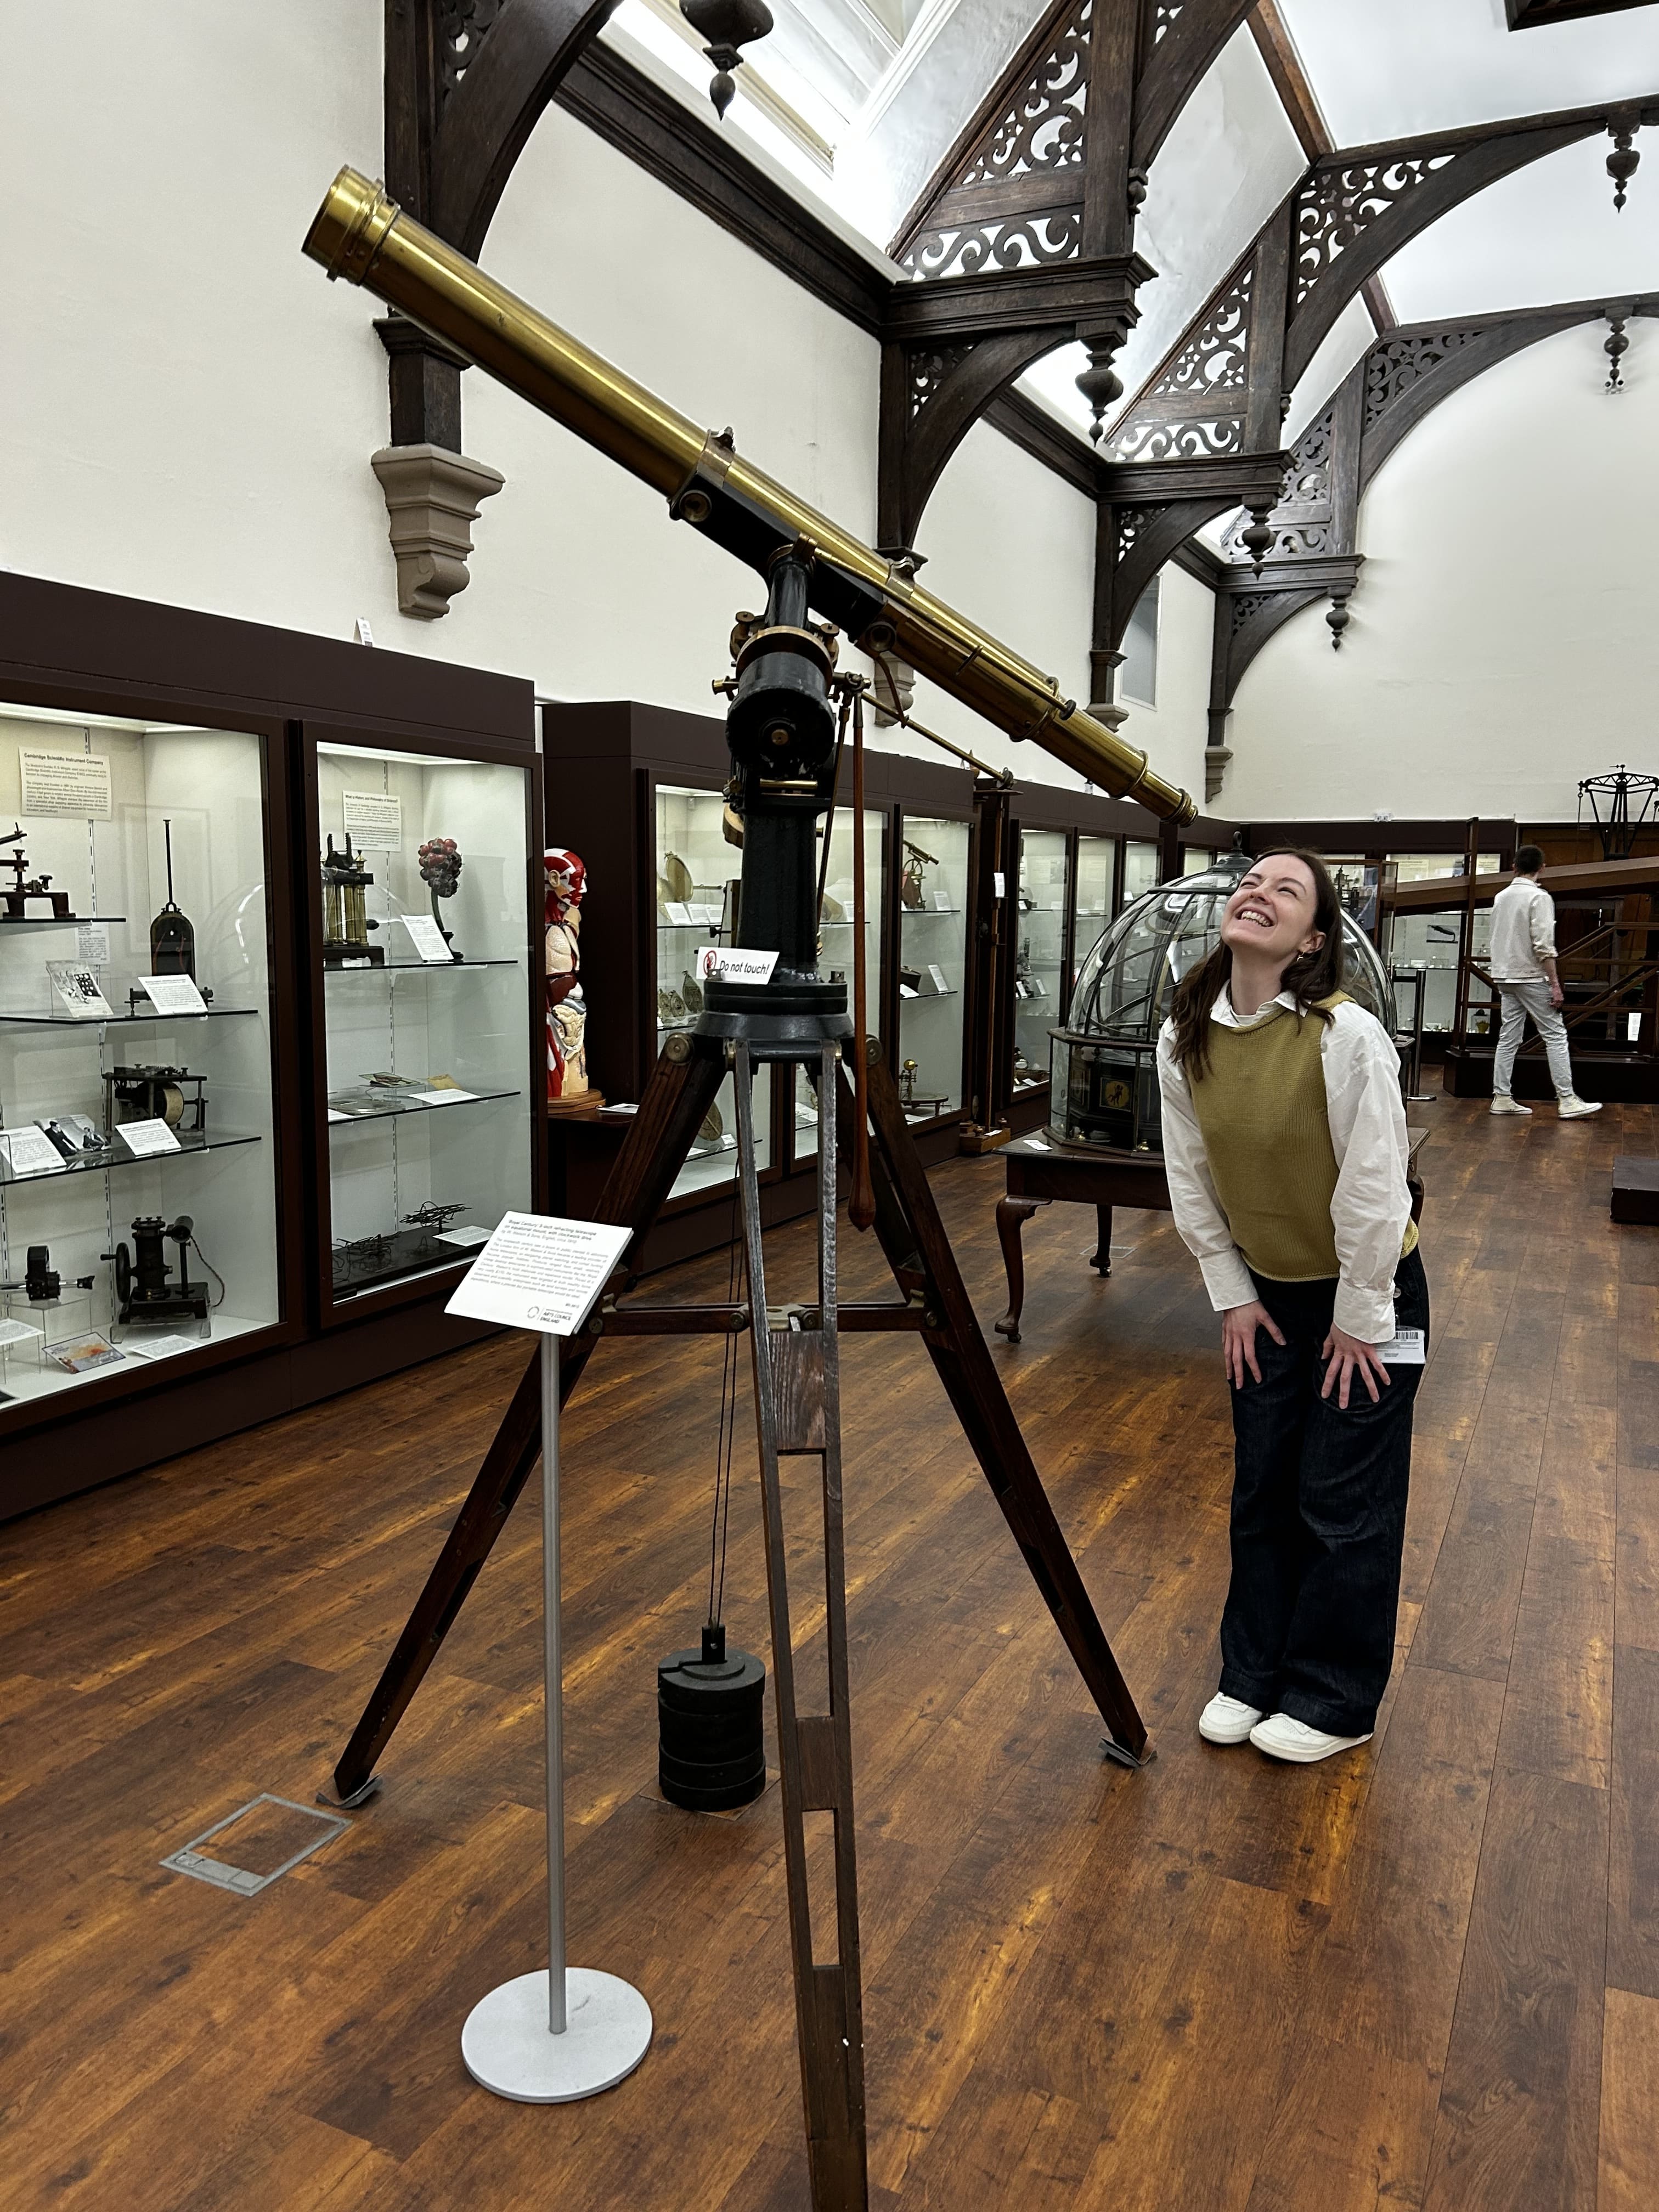 Annie in the Main Gallery, looking at the Refracting Telescope, Object Number Wh.5612.